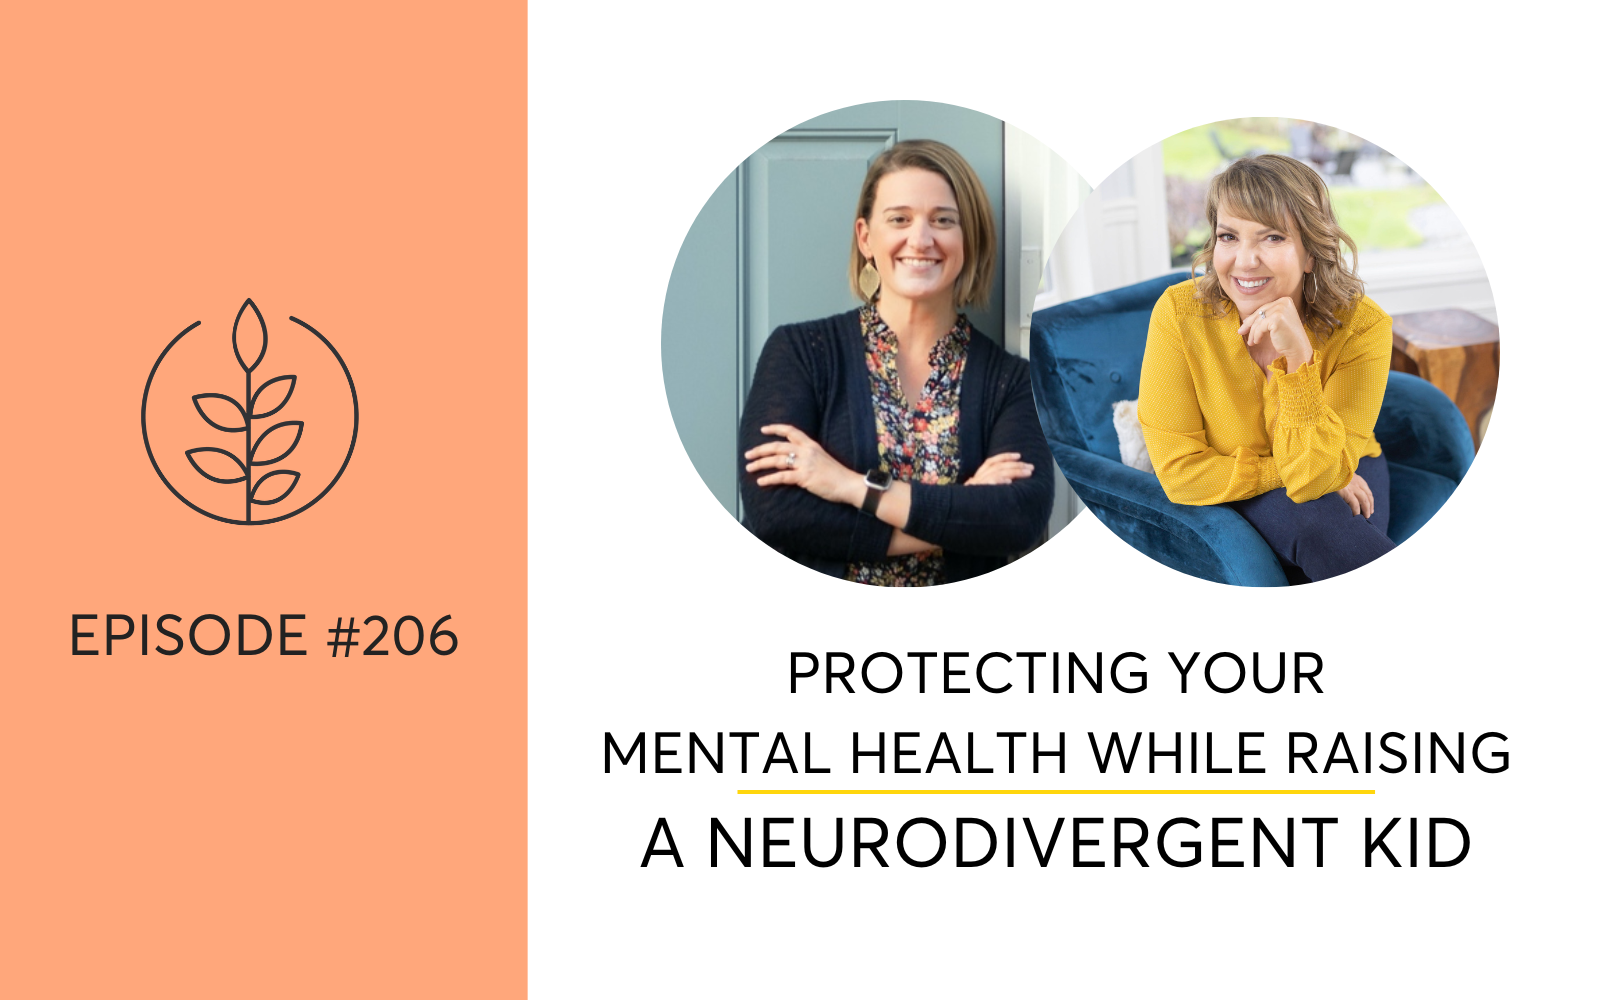 How To Protect Your Mental Health While Raising A Neurodivergent Kid